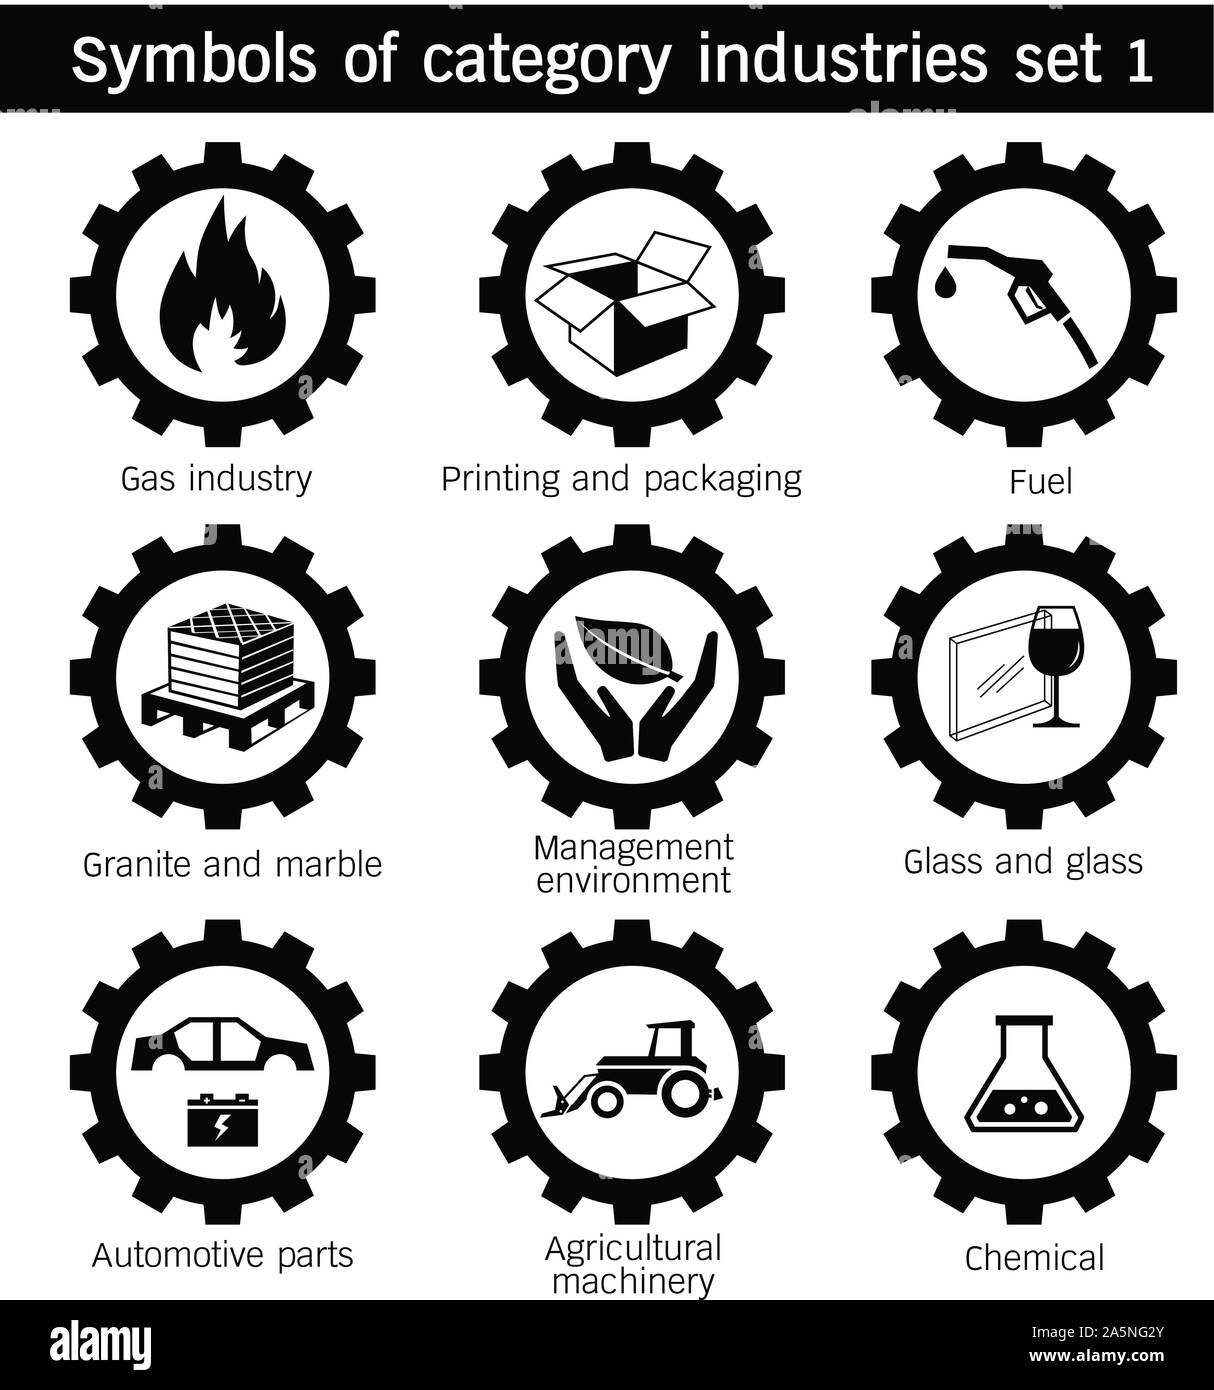 Symbols of category industries icon set Gas, Printing, packaging, Glass, Agricultural, machinery, Management, environment, Granite, marble, Chemical, Stock Vector